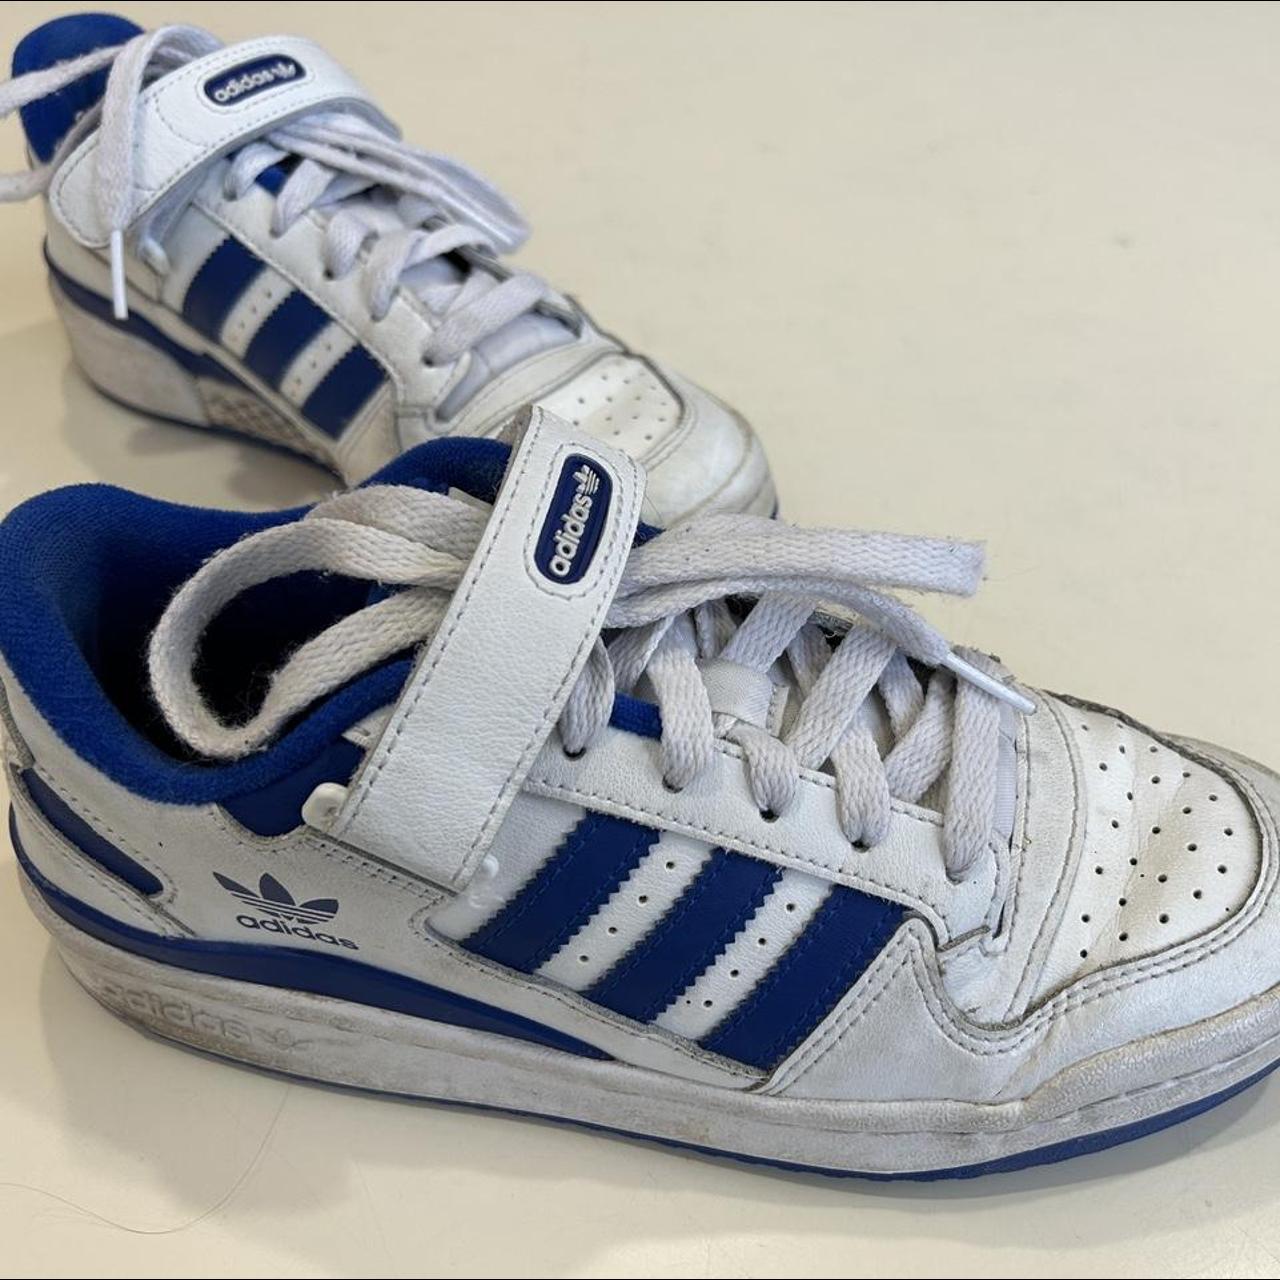 Adidas Women's Blue and White Trainers